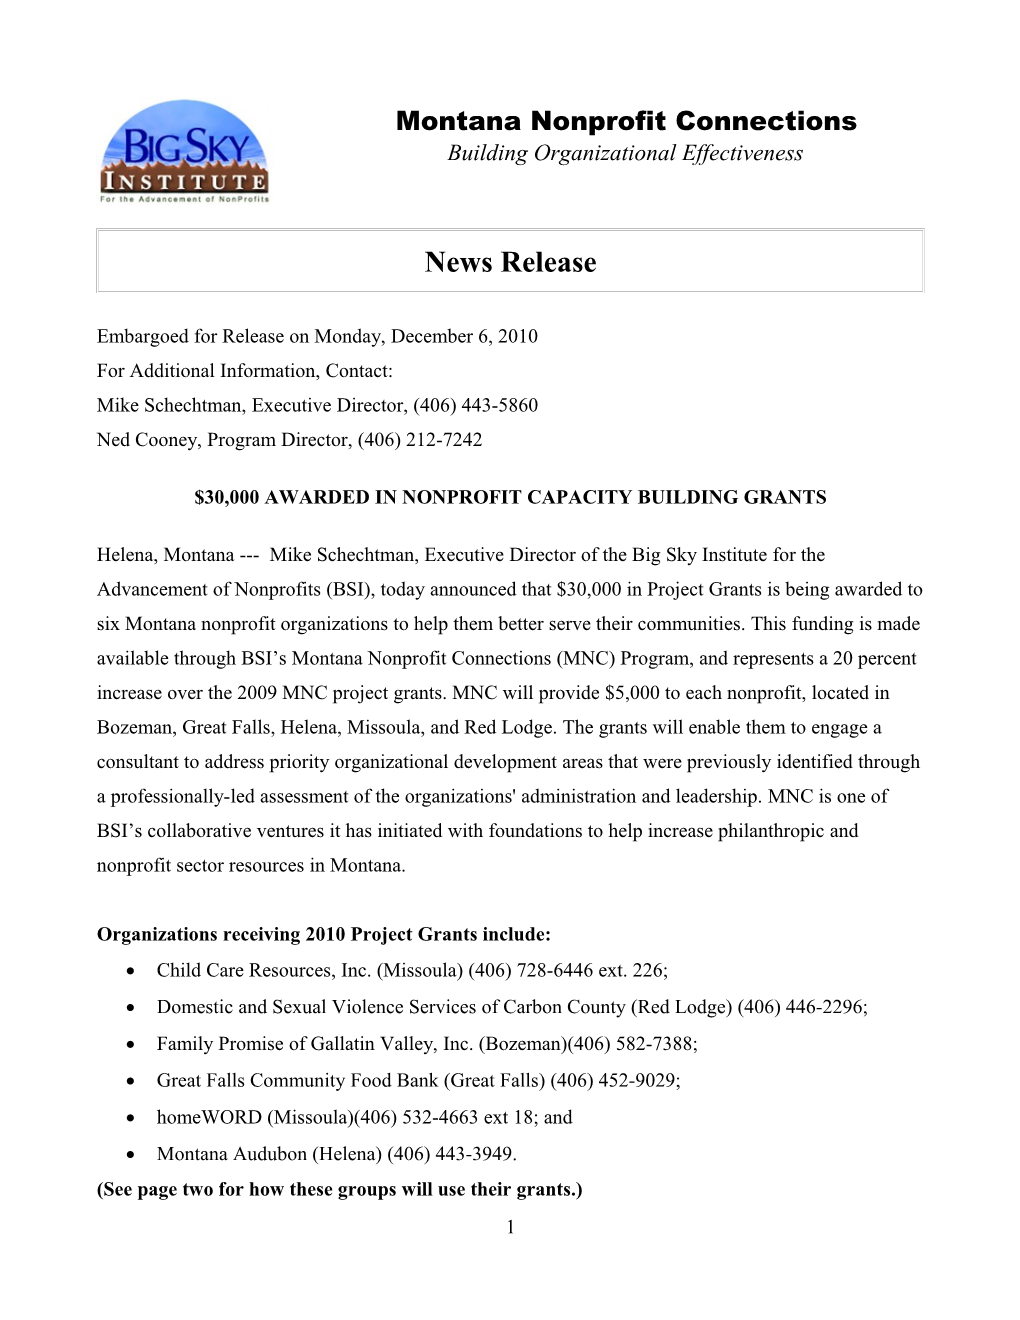 Letter of Agreement for the Montana Nonprofit Connections Progr